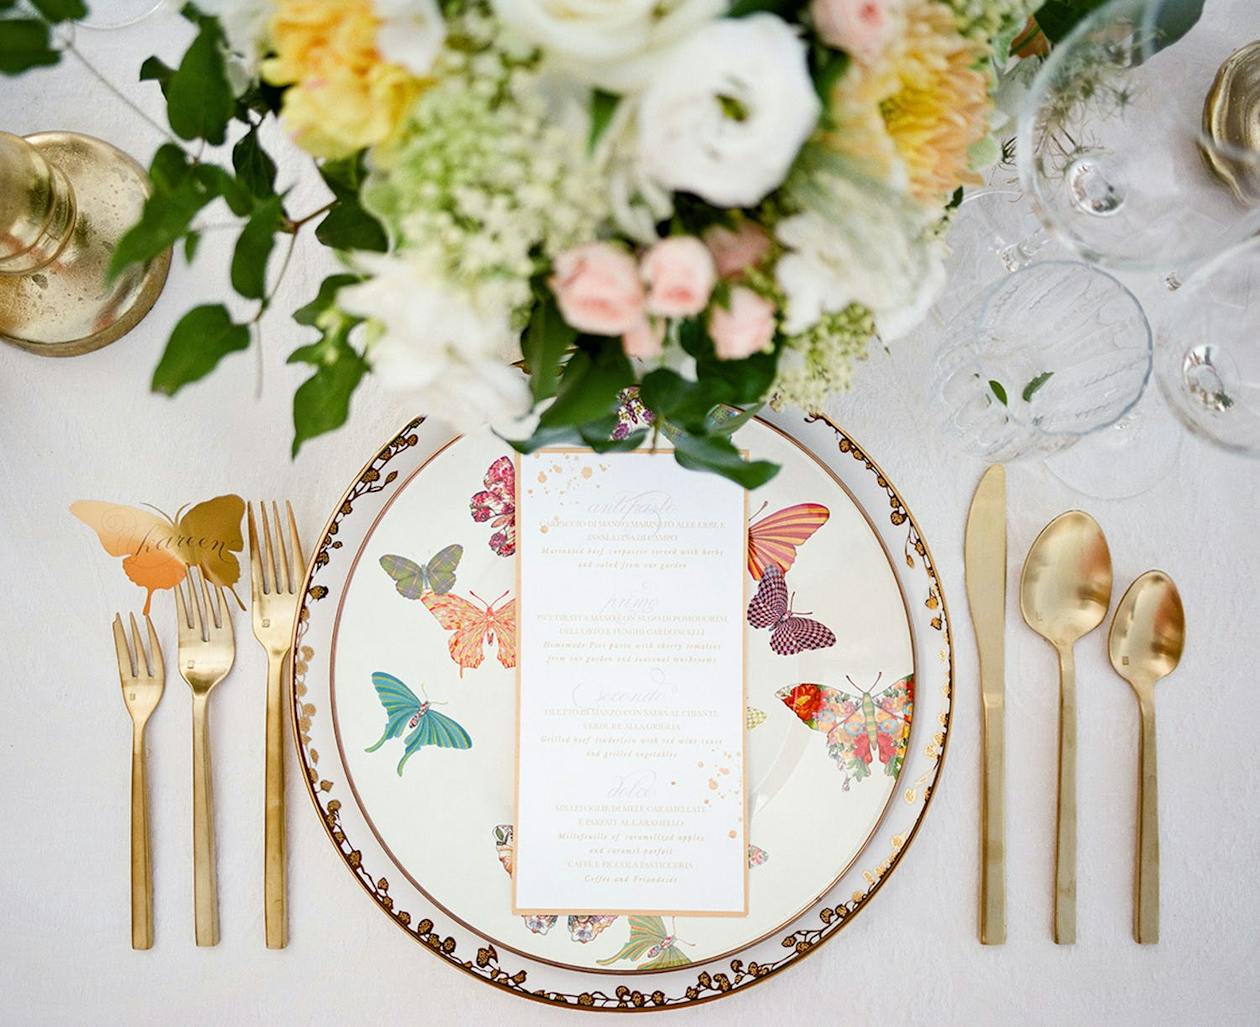 Summer garden wedding place setting with butterfly chinaware | PartySlate